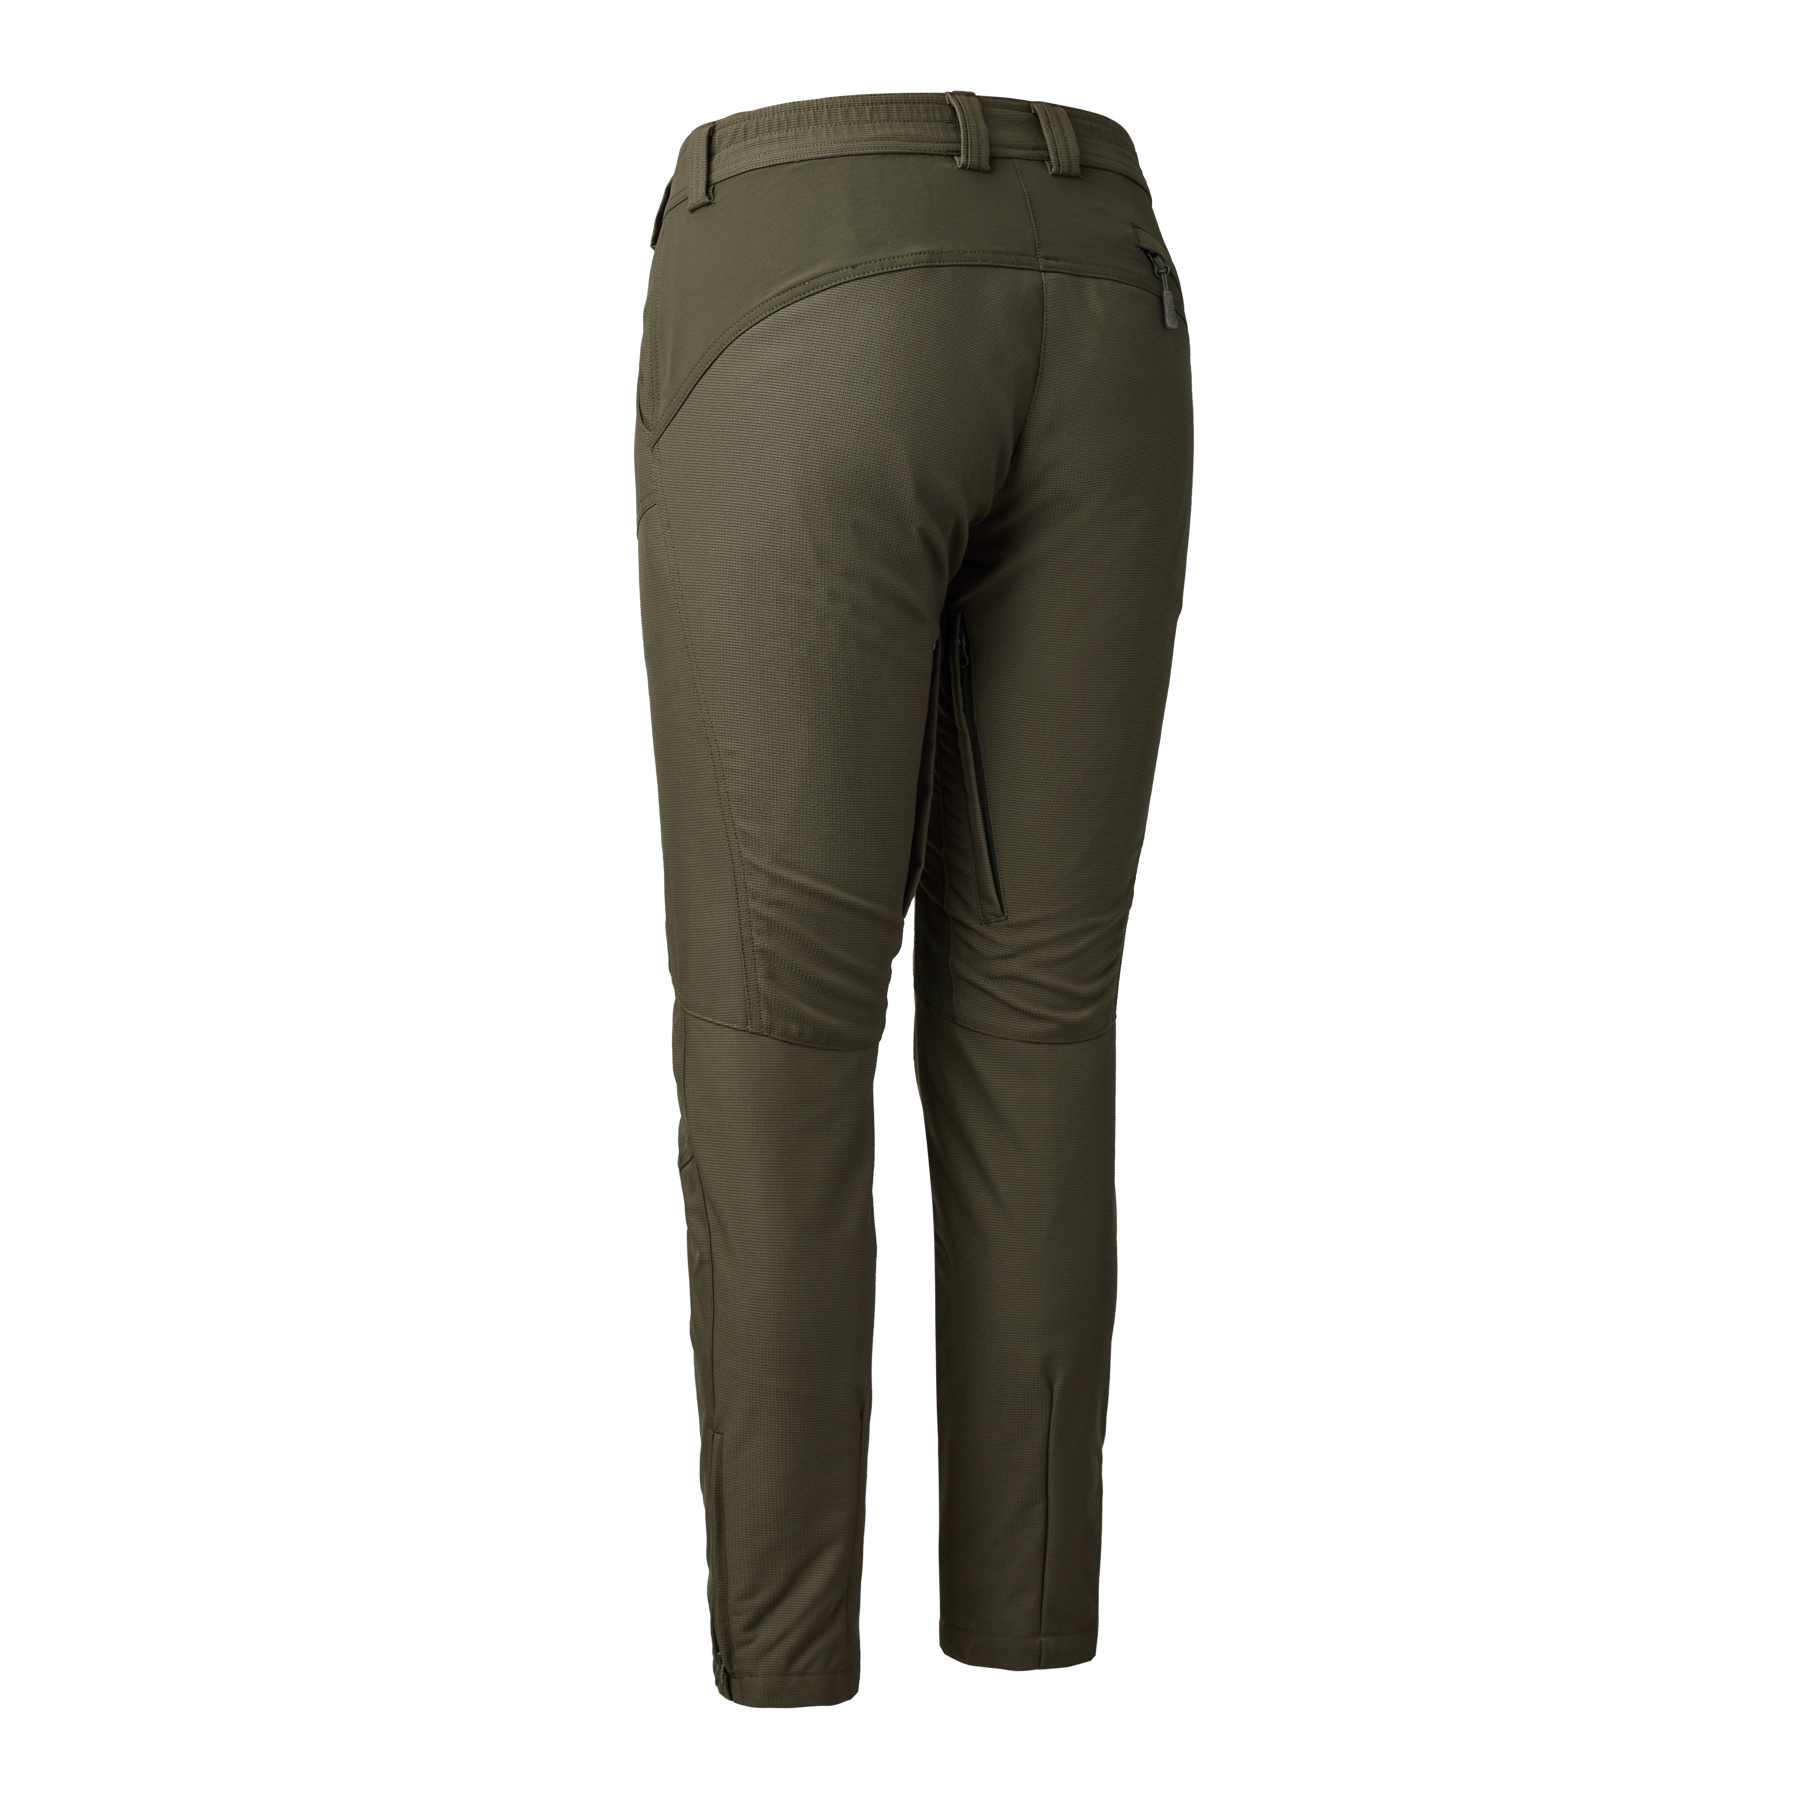 Lady Ann Extreme Boot Trousers with membrane